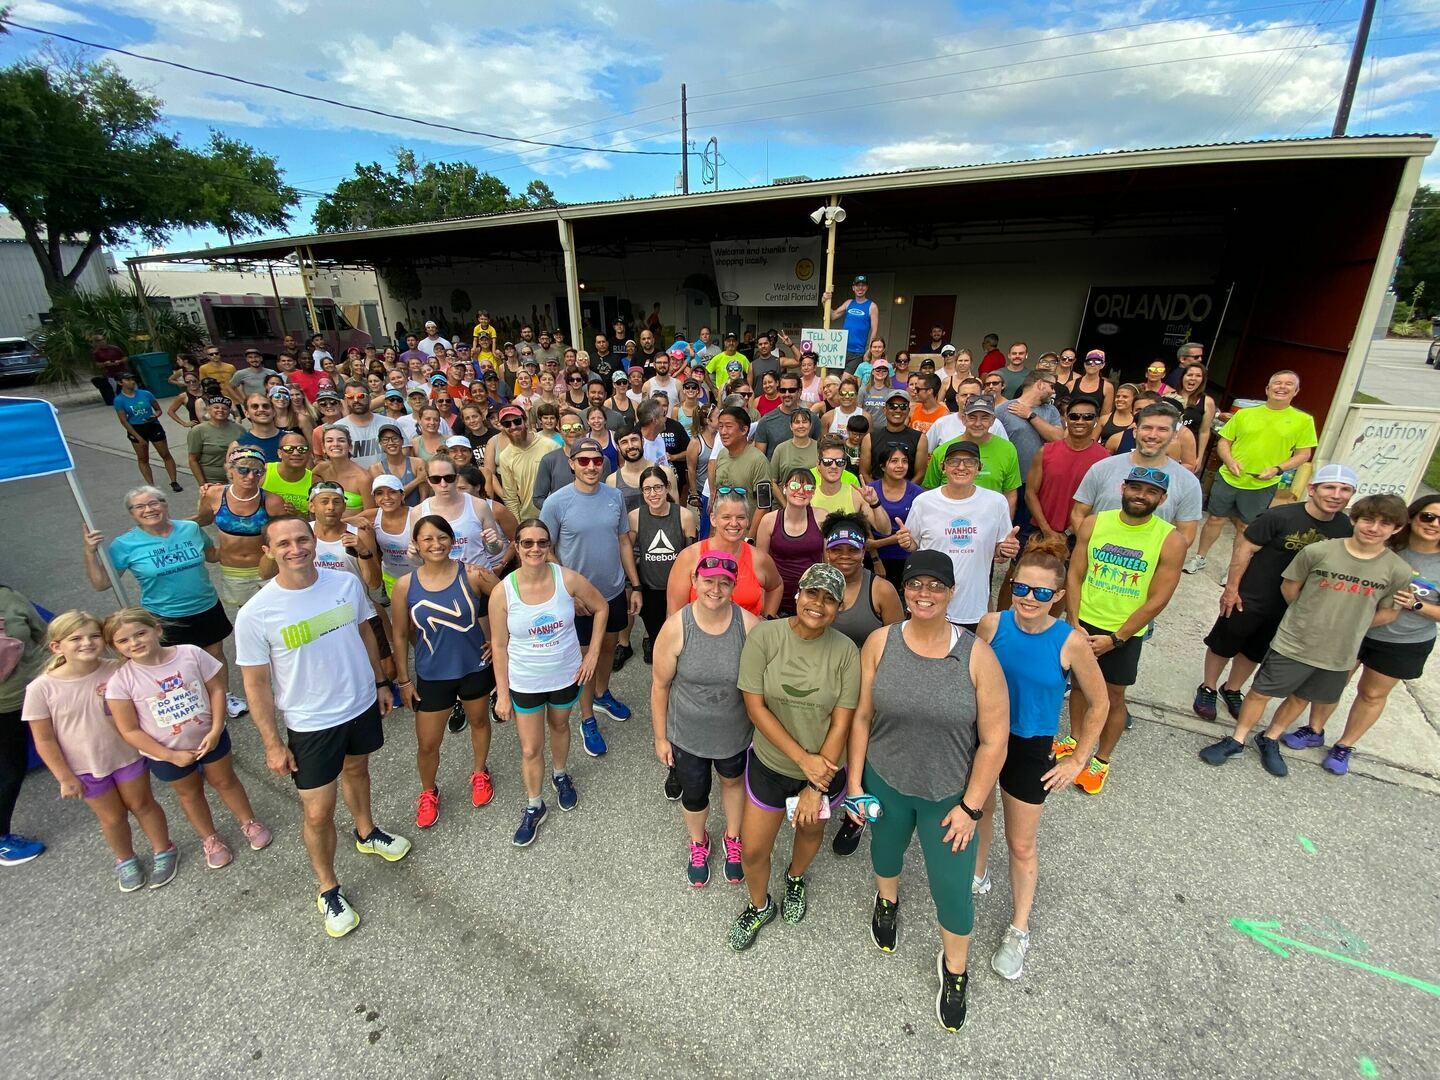 Track Shack Hosts Scavenger Run with Outta Pocket Sponsored by Asics and Ciele, Orlando, Florida, United States